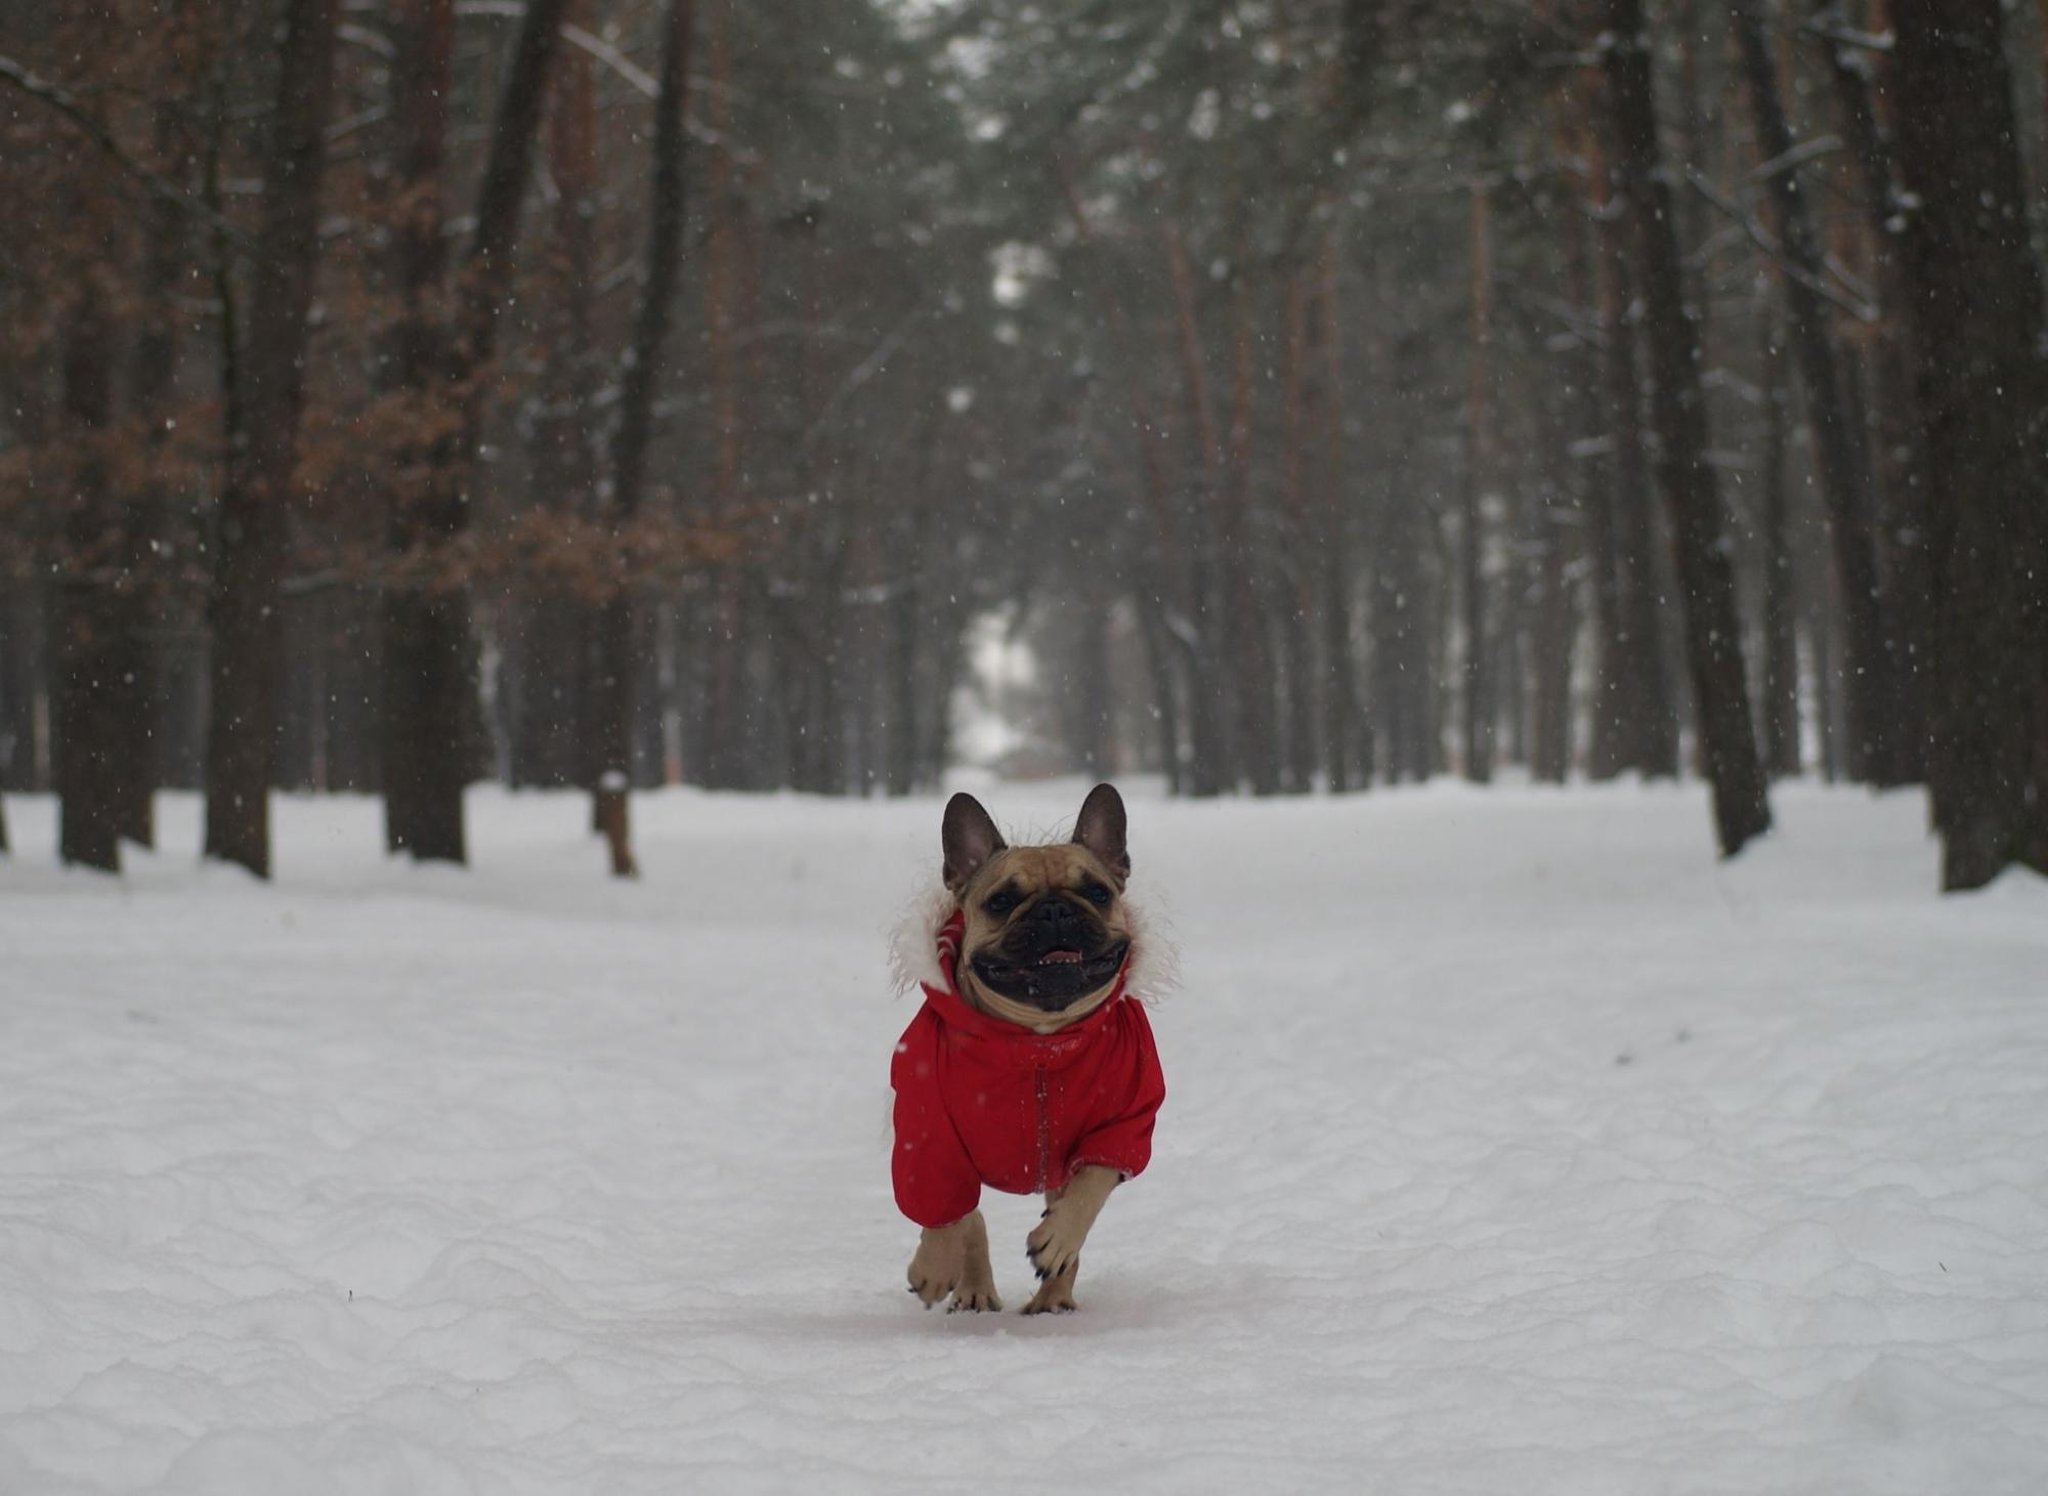 Here are 10 breeds of adorable dog that can’t cope with cold so need wrapped up on winter walks – cute pups